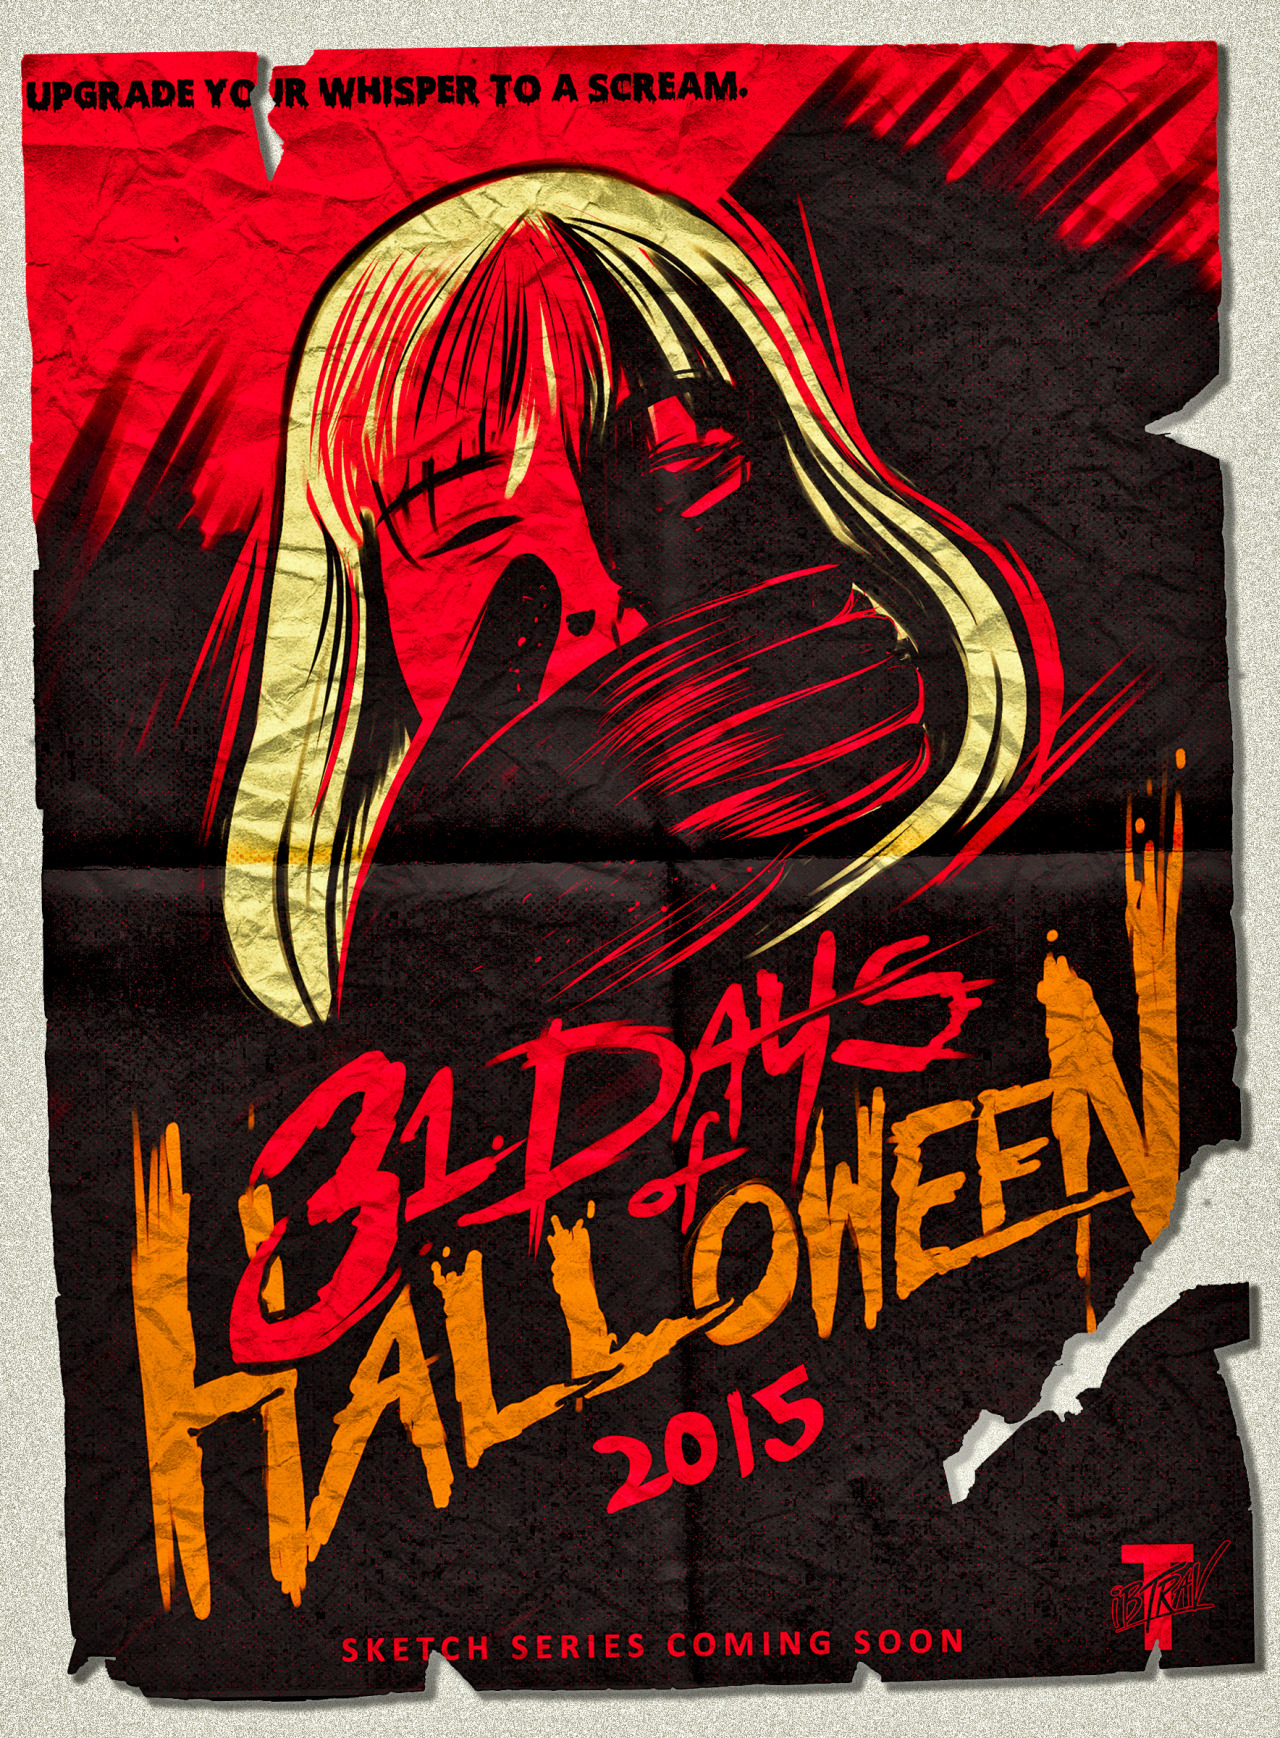 It’s coming! “31 Days of Halloween” Sketch Series returns October 1, 2015!Upgrade your whispers to a SCREAM.